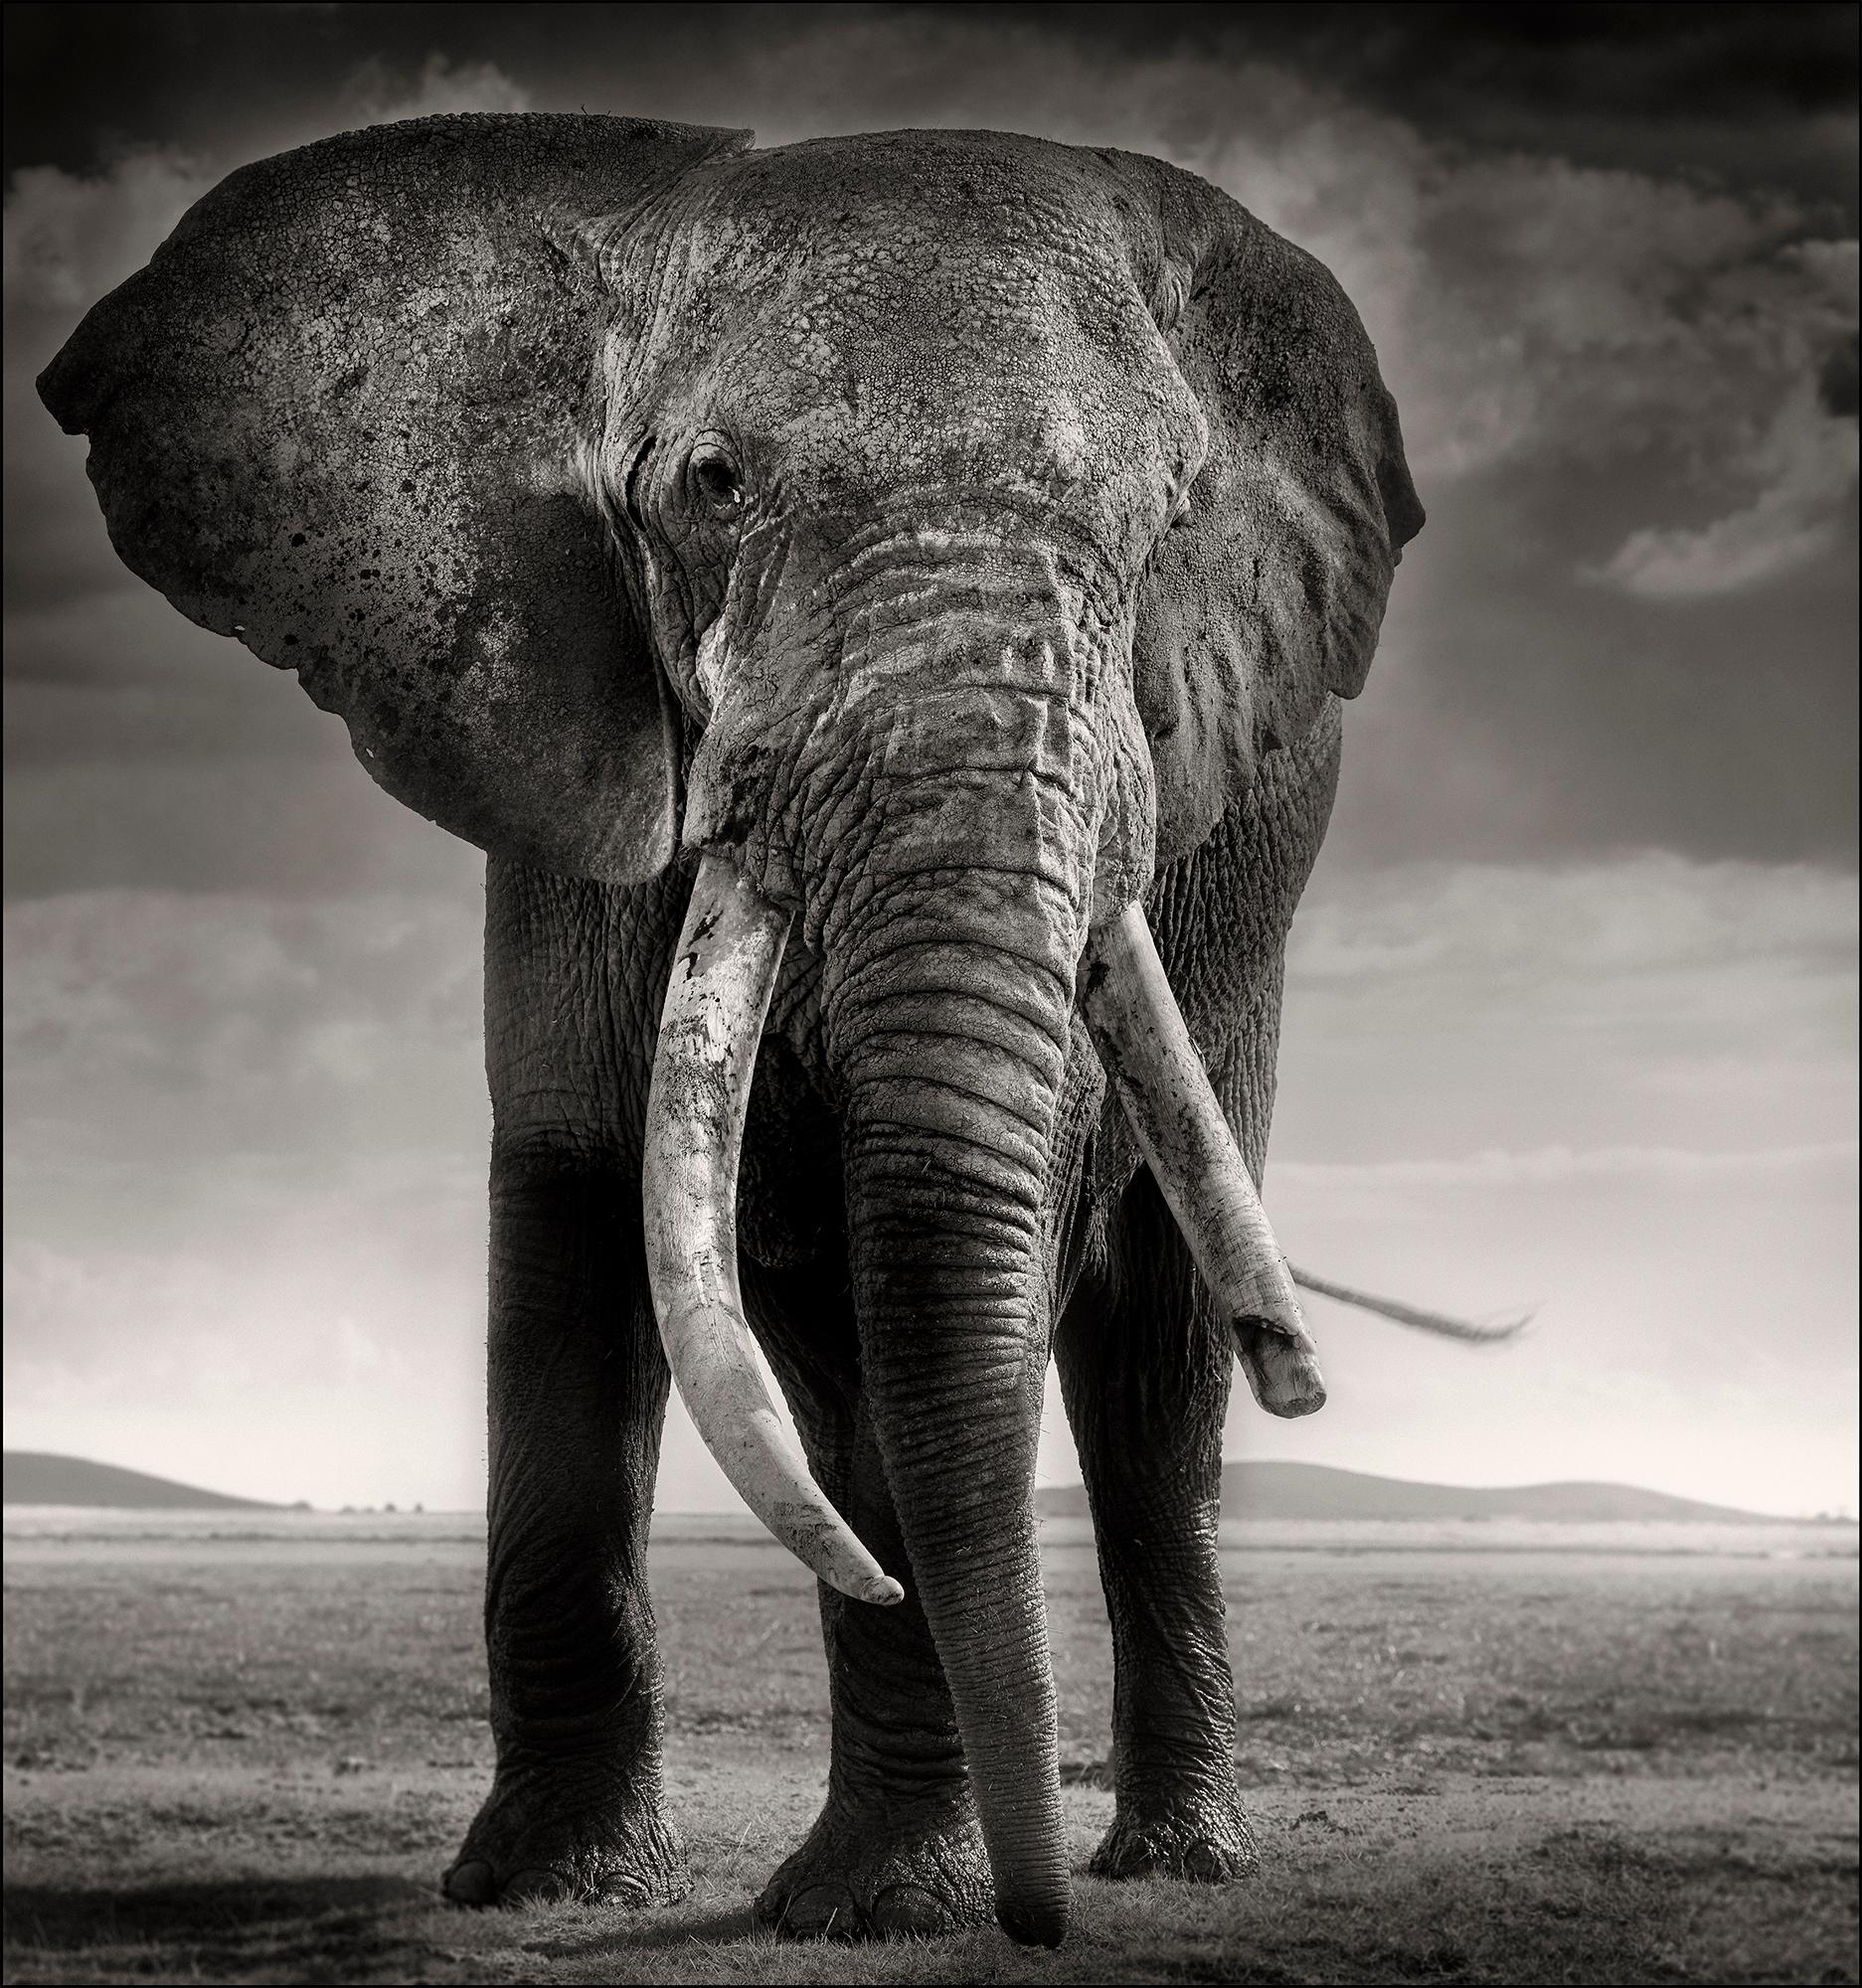 Primo - Guardian of Eden, Platinum, animal, elephant, black and white photograph - Photograph by Joachim Schmeisser